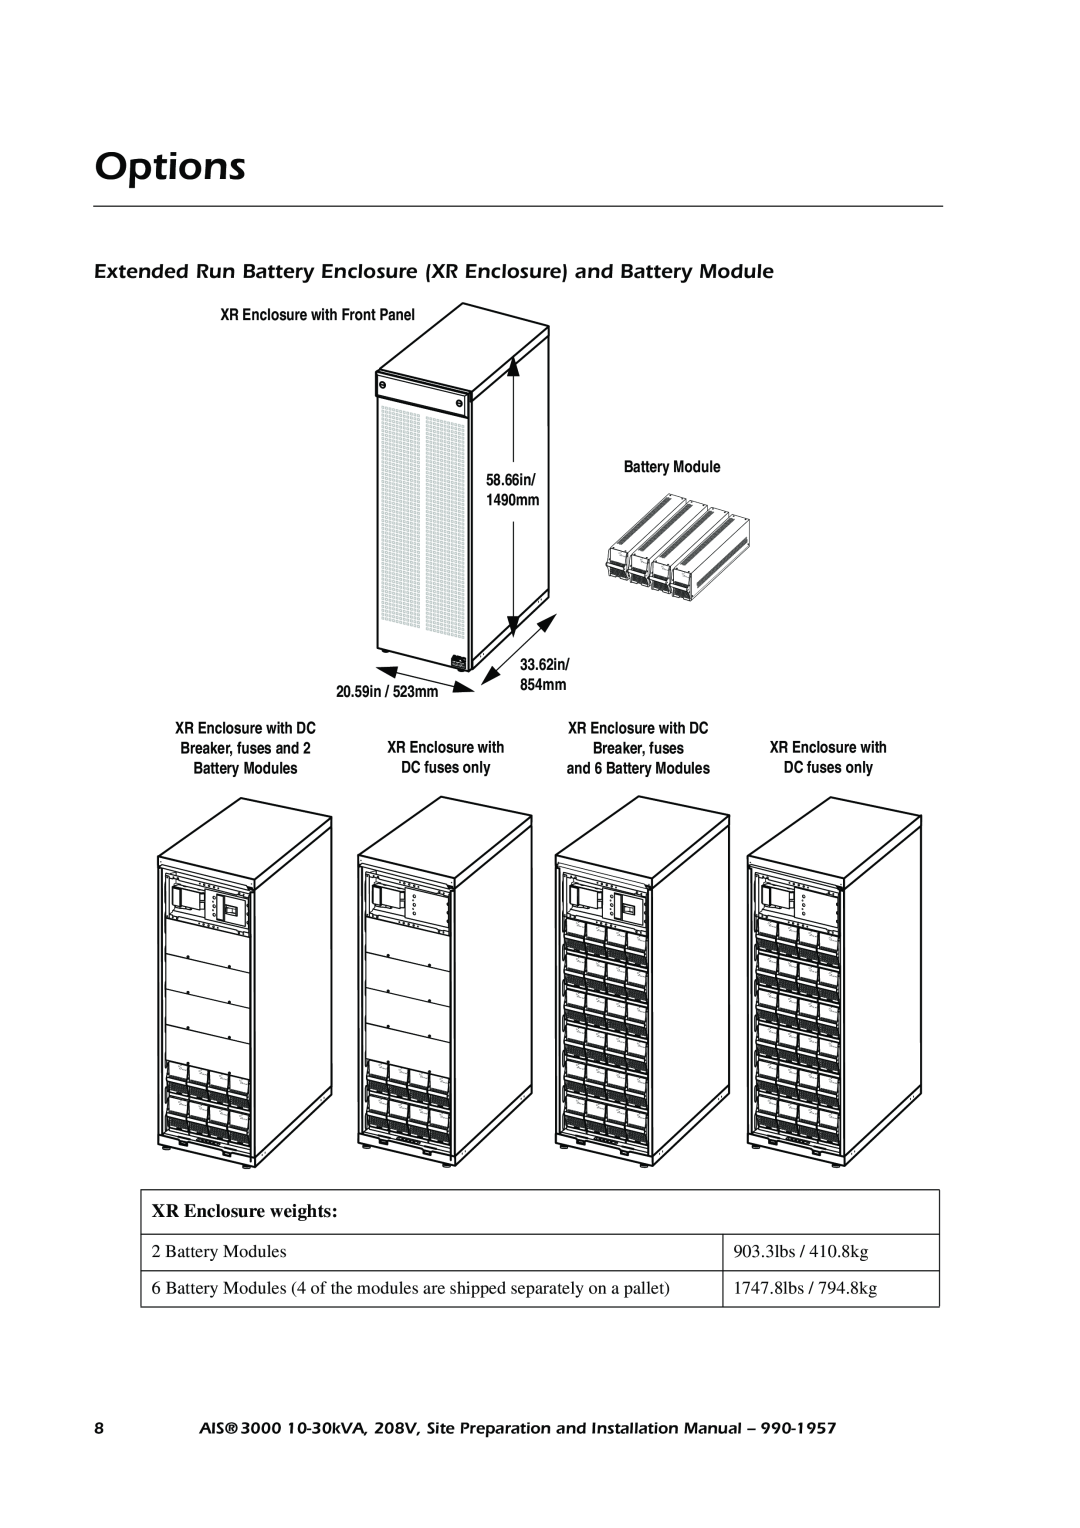 APC 3000 installation manual Options, Extended Run Battery Enclosure XR Enclosure and Battery Module, XR Enclosure weights 